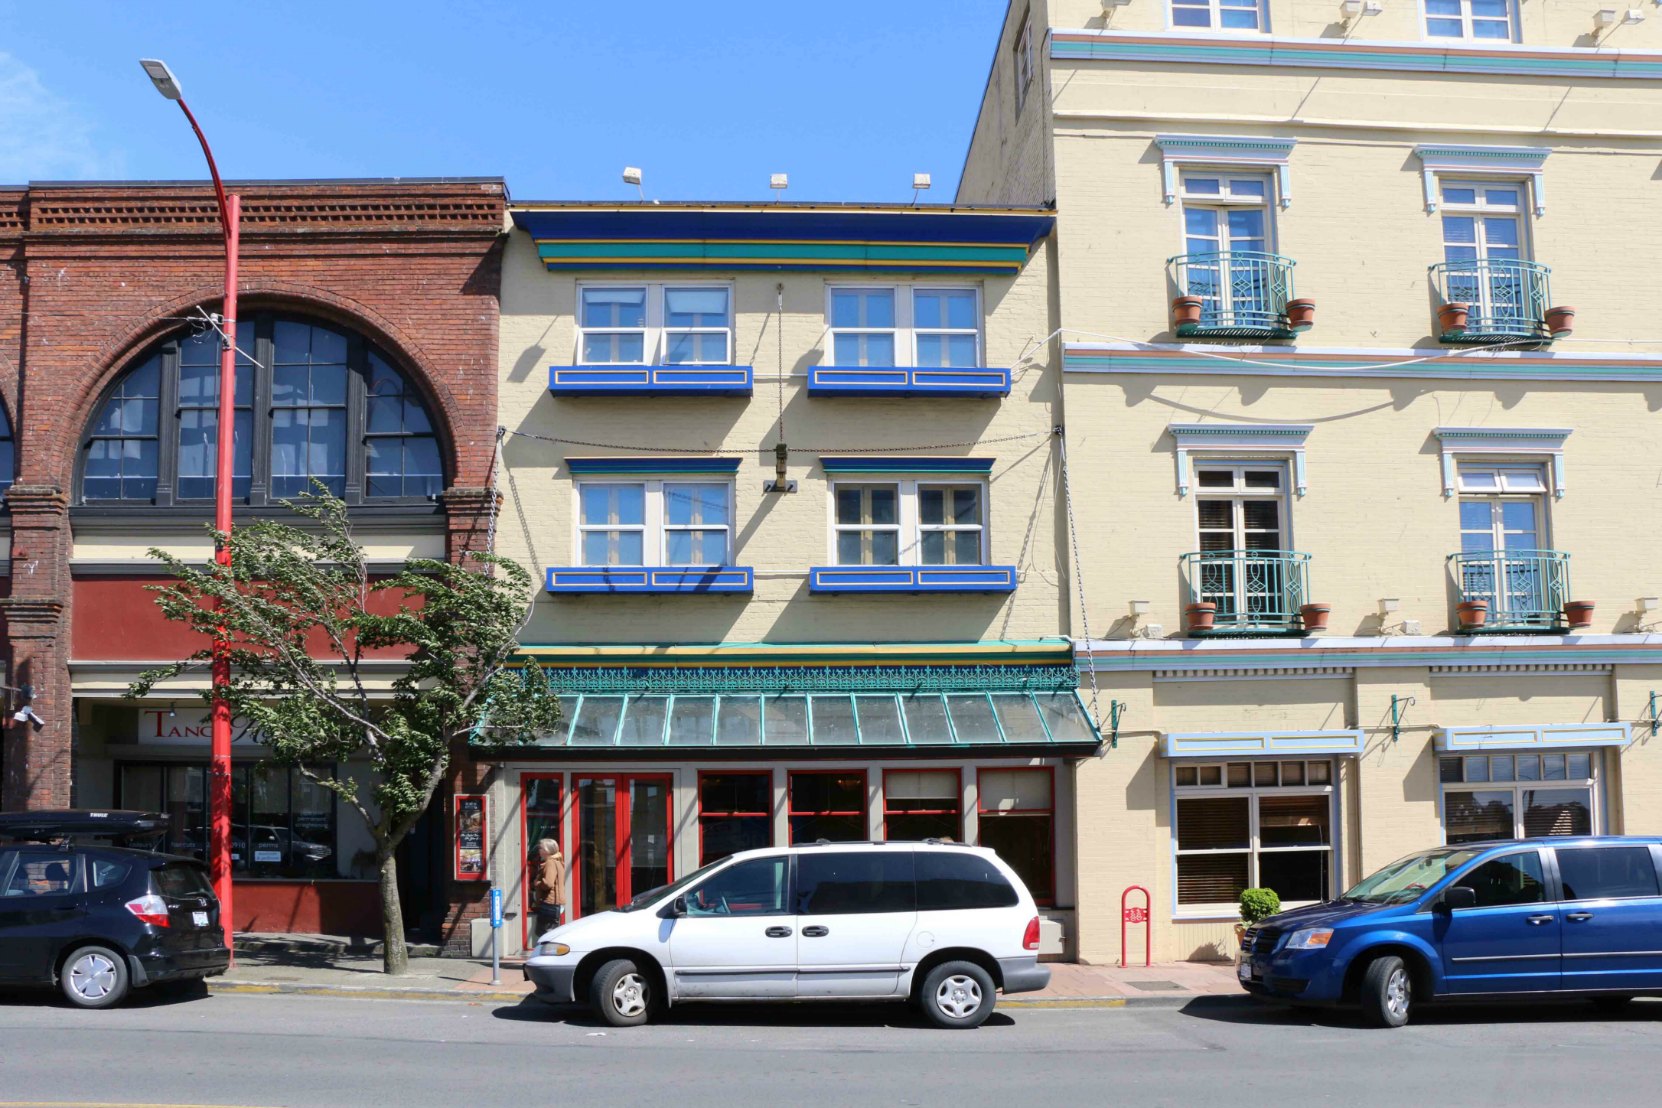 1615 Store Street, built in 1913 by architect Milo S. Farwell as a warehouse for Scott & Peden, which also built the adjacent building, now Swan's Hotel & Brewpub, at 506 Pandora Avenue.